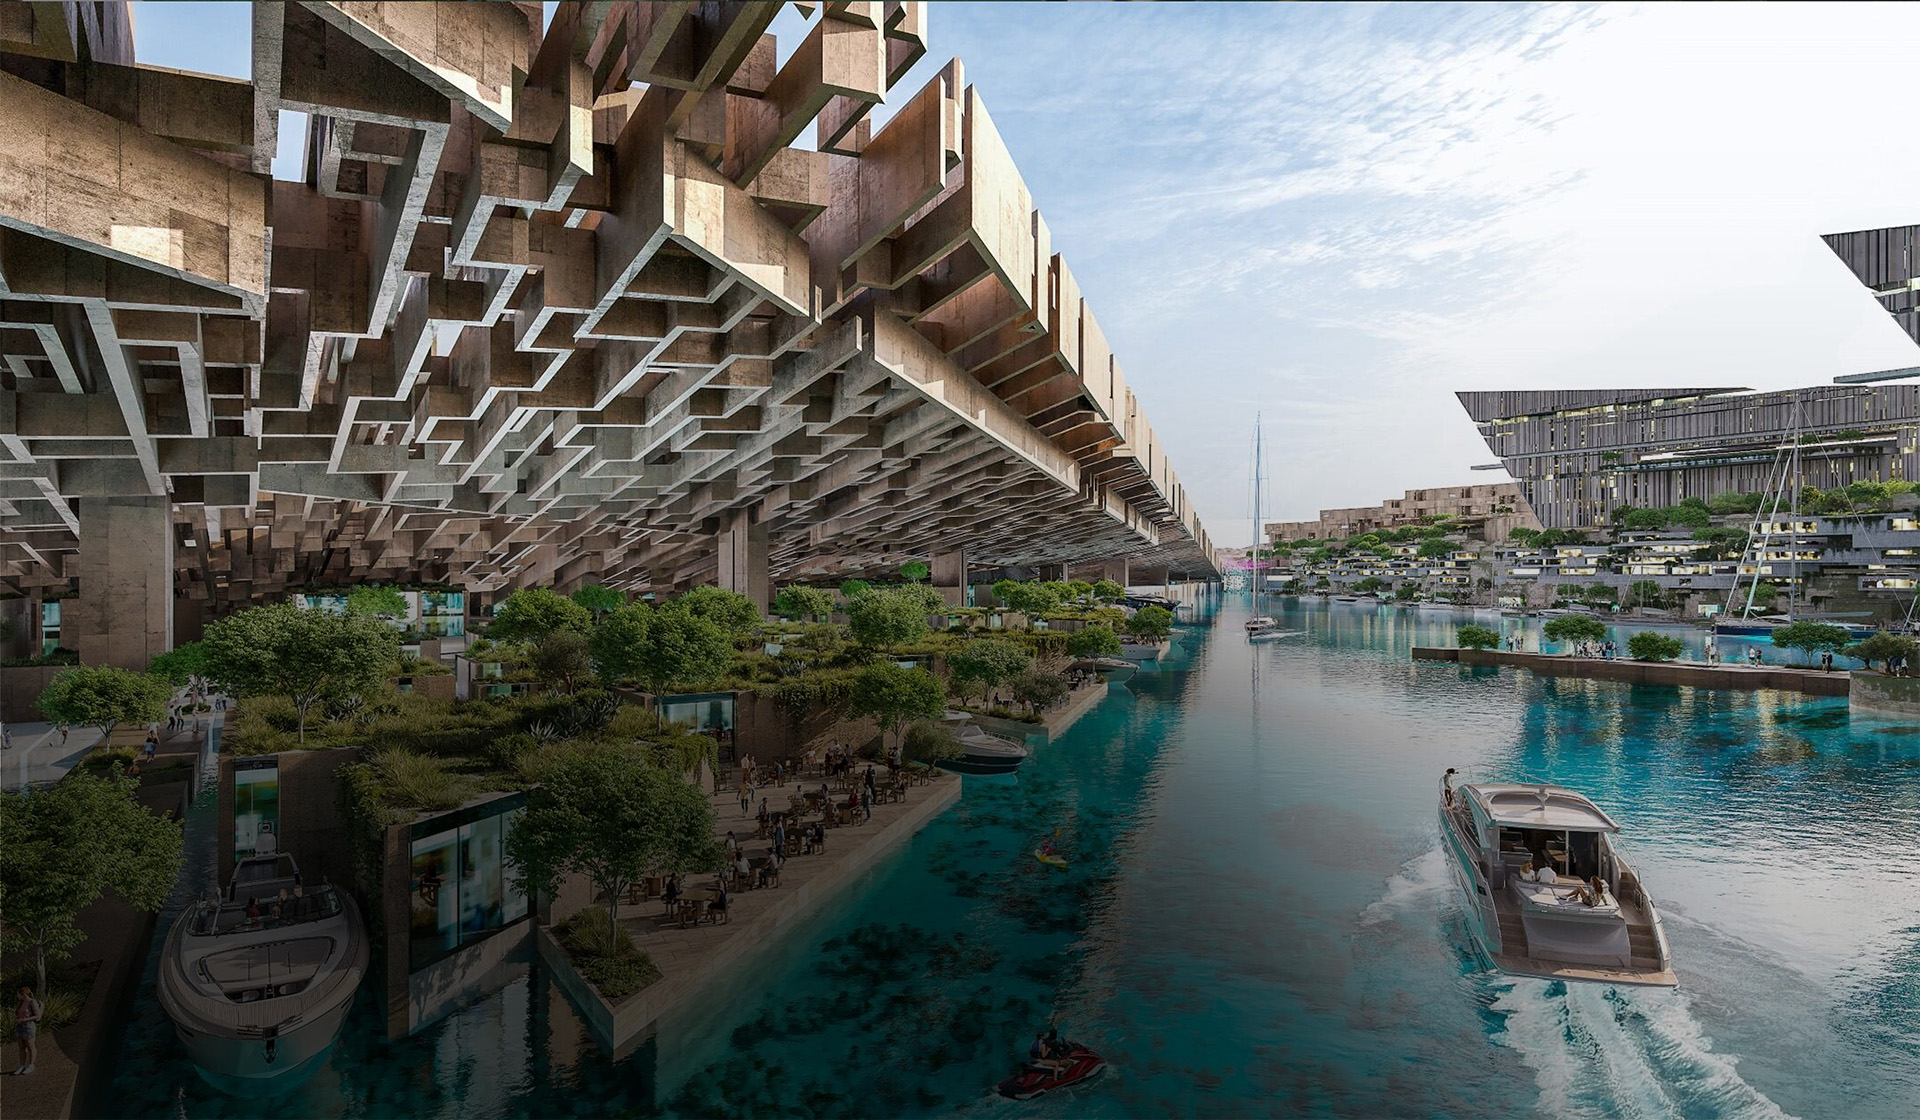 Jaumur's marina apartments with lush greenery and waterfalls, suspended in the sky